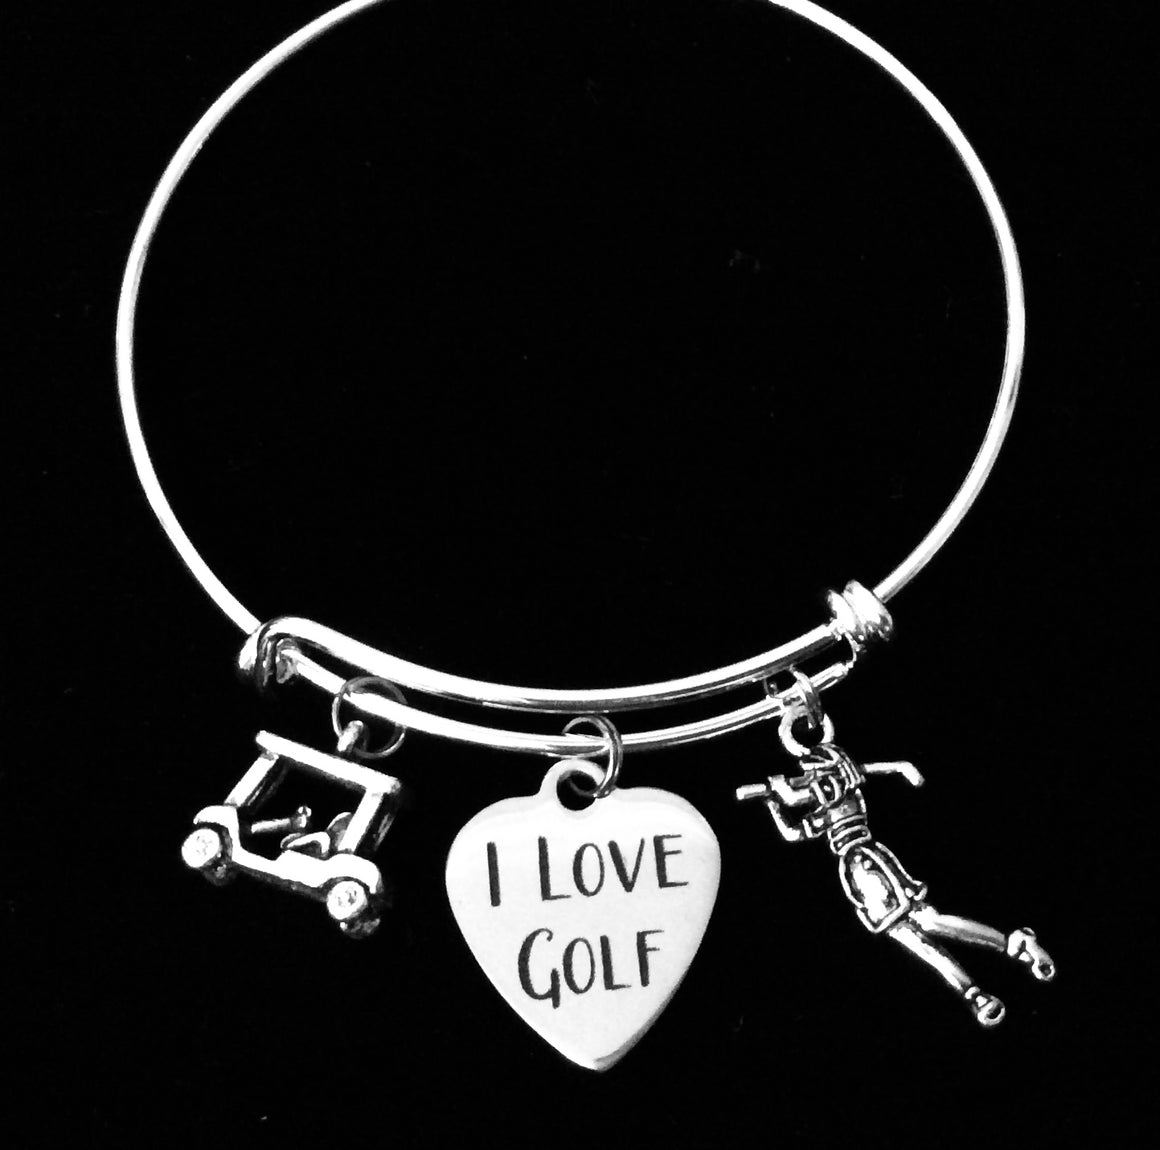 I Love Golf Jewelry Golfer Expandable Charm Bracelet Adjustable Silver Wire Bangle Golf Cart Woman Golfer One Size Fits All Gift